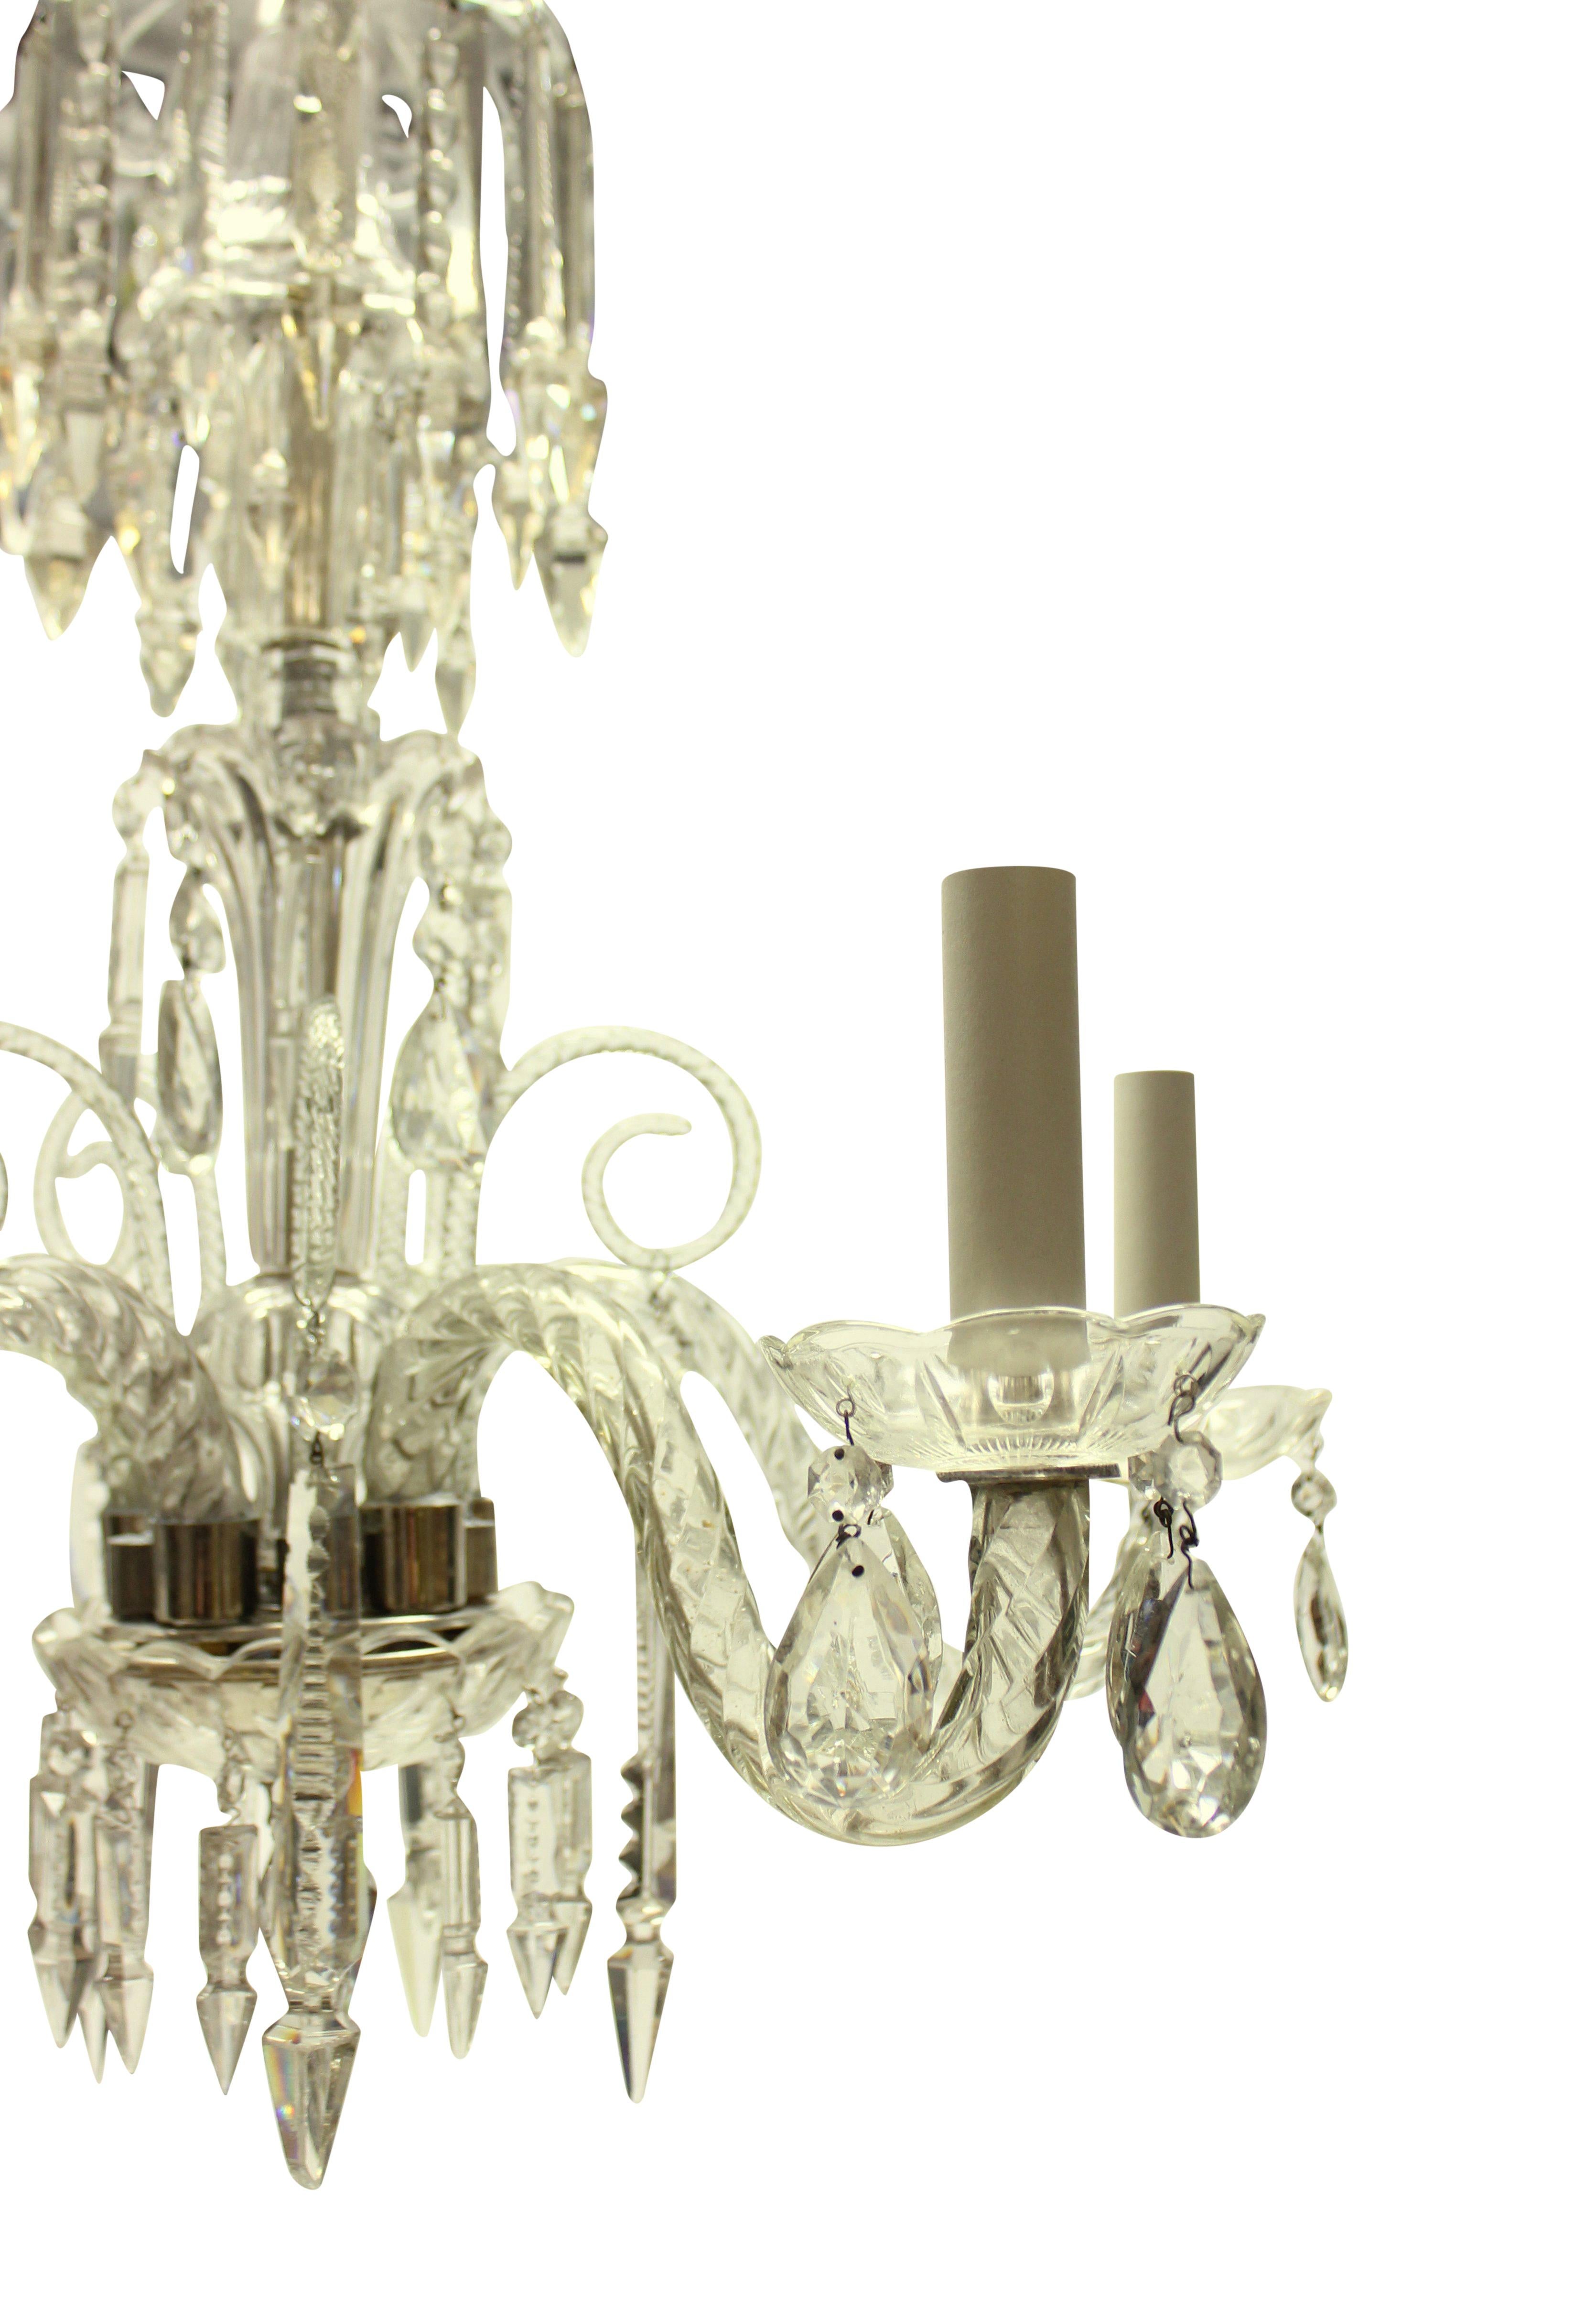 Mid-20th Century Small English Cut Glass Chandelier